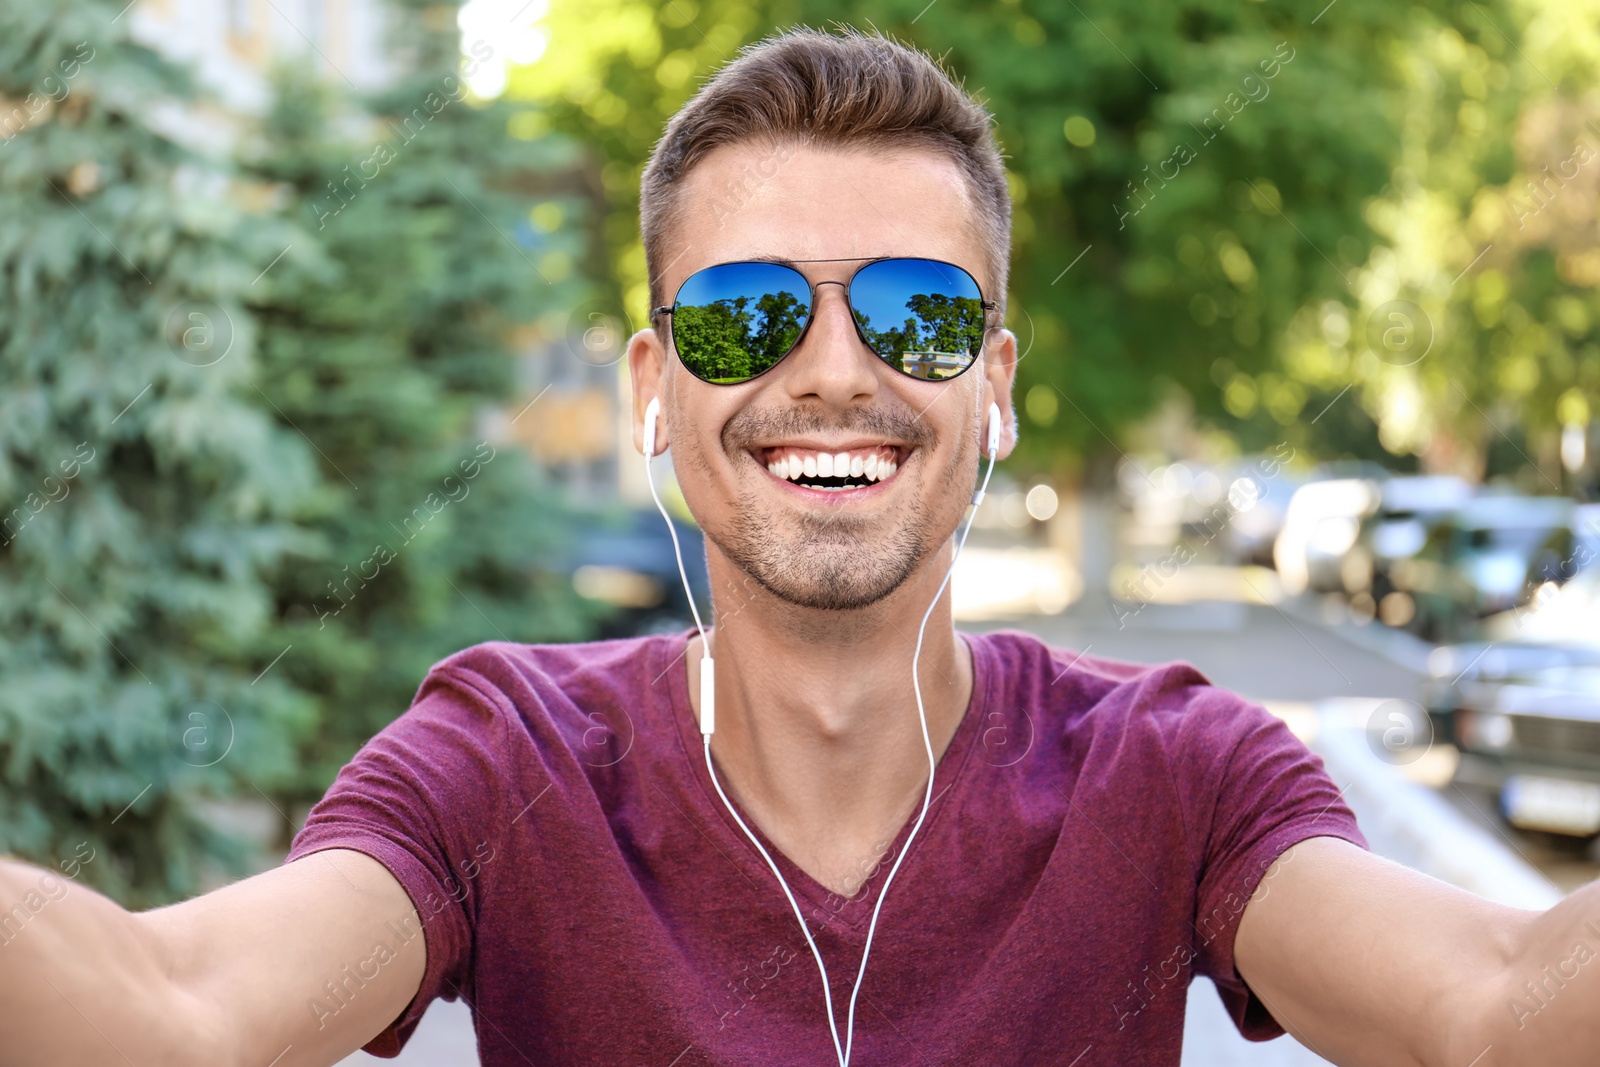 Photo of Young man in sunglasses taking selfie outdoors